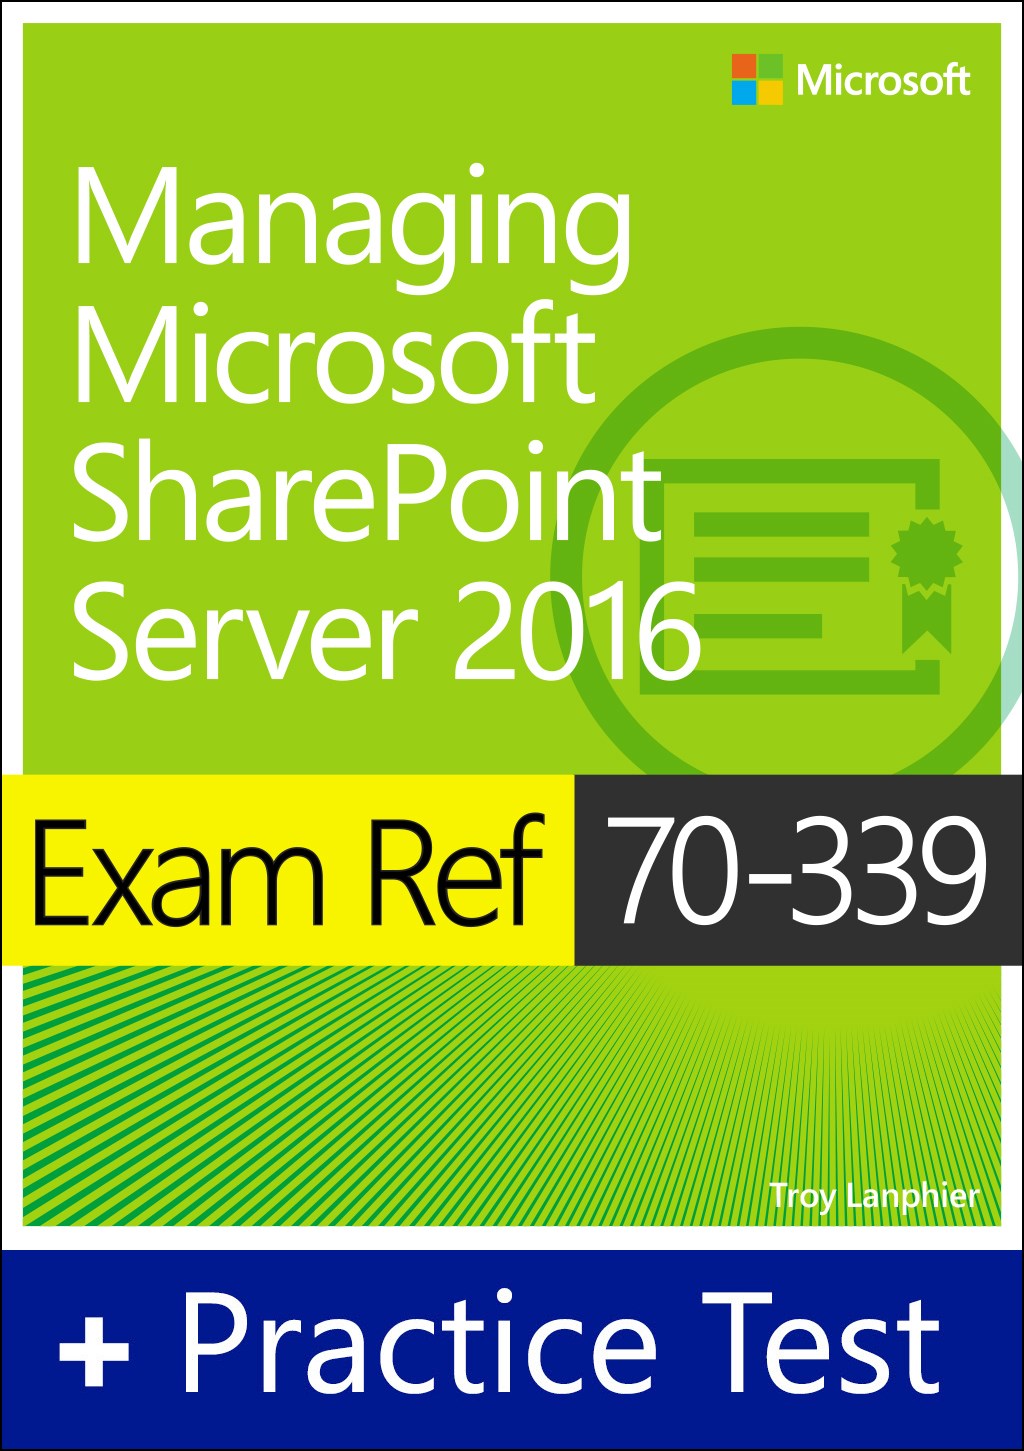 Exam Ref 70-339 Managing Microsoft SharePoint Server 2016 with Practice Test